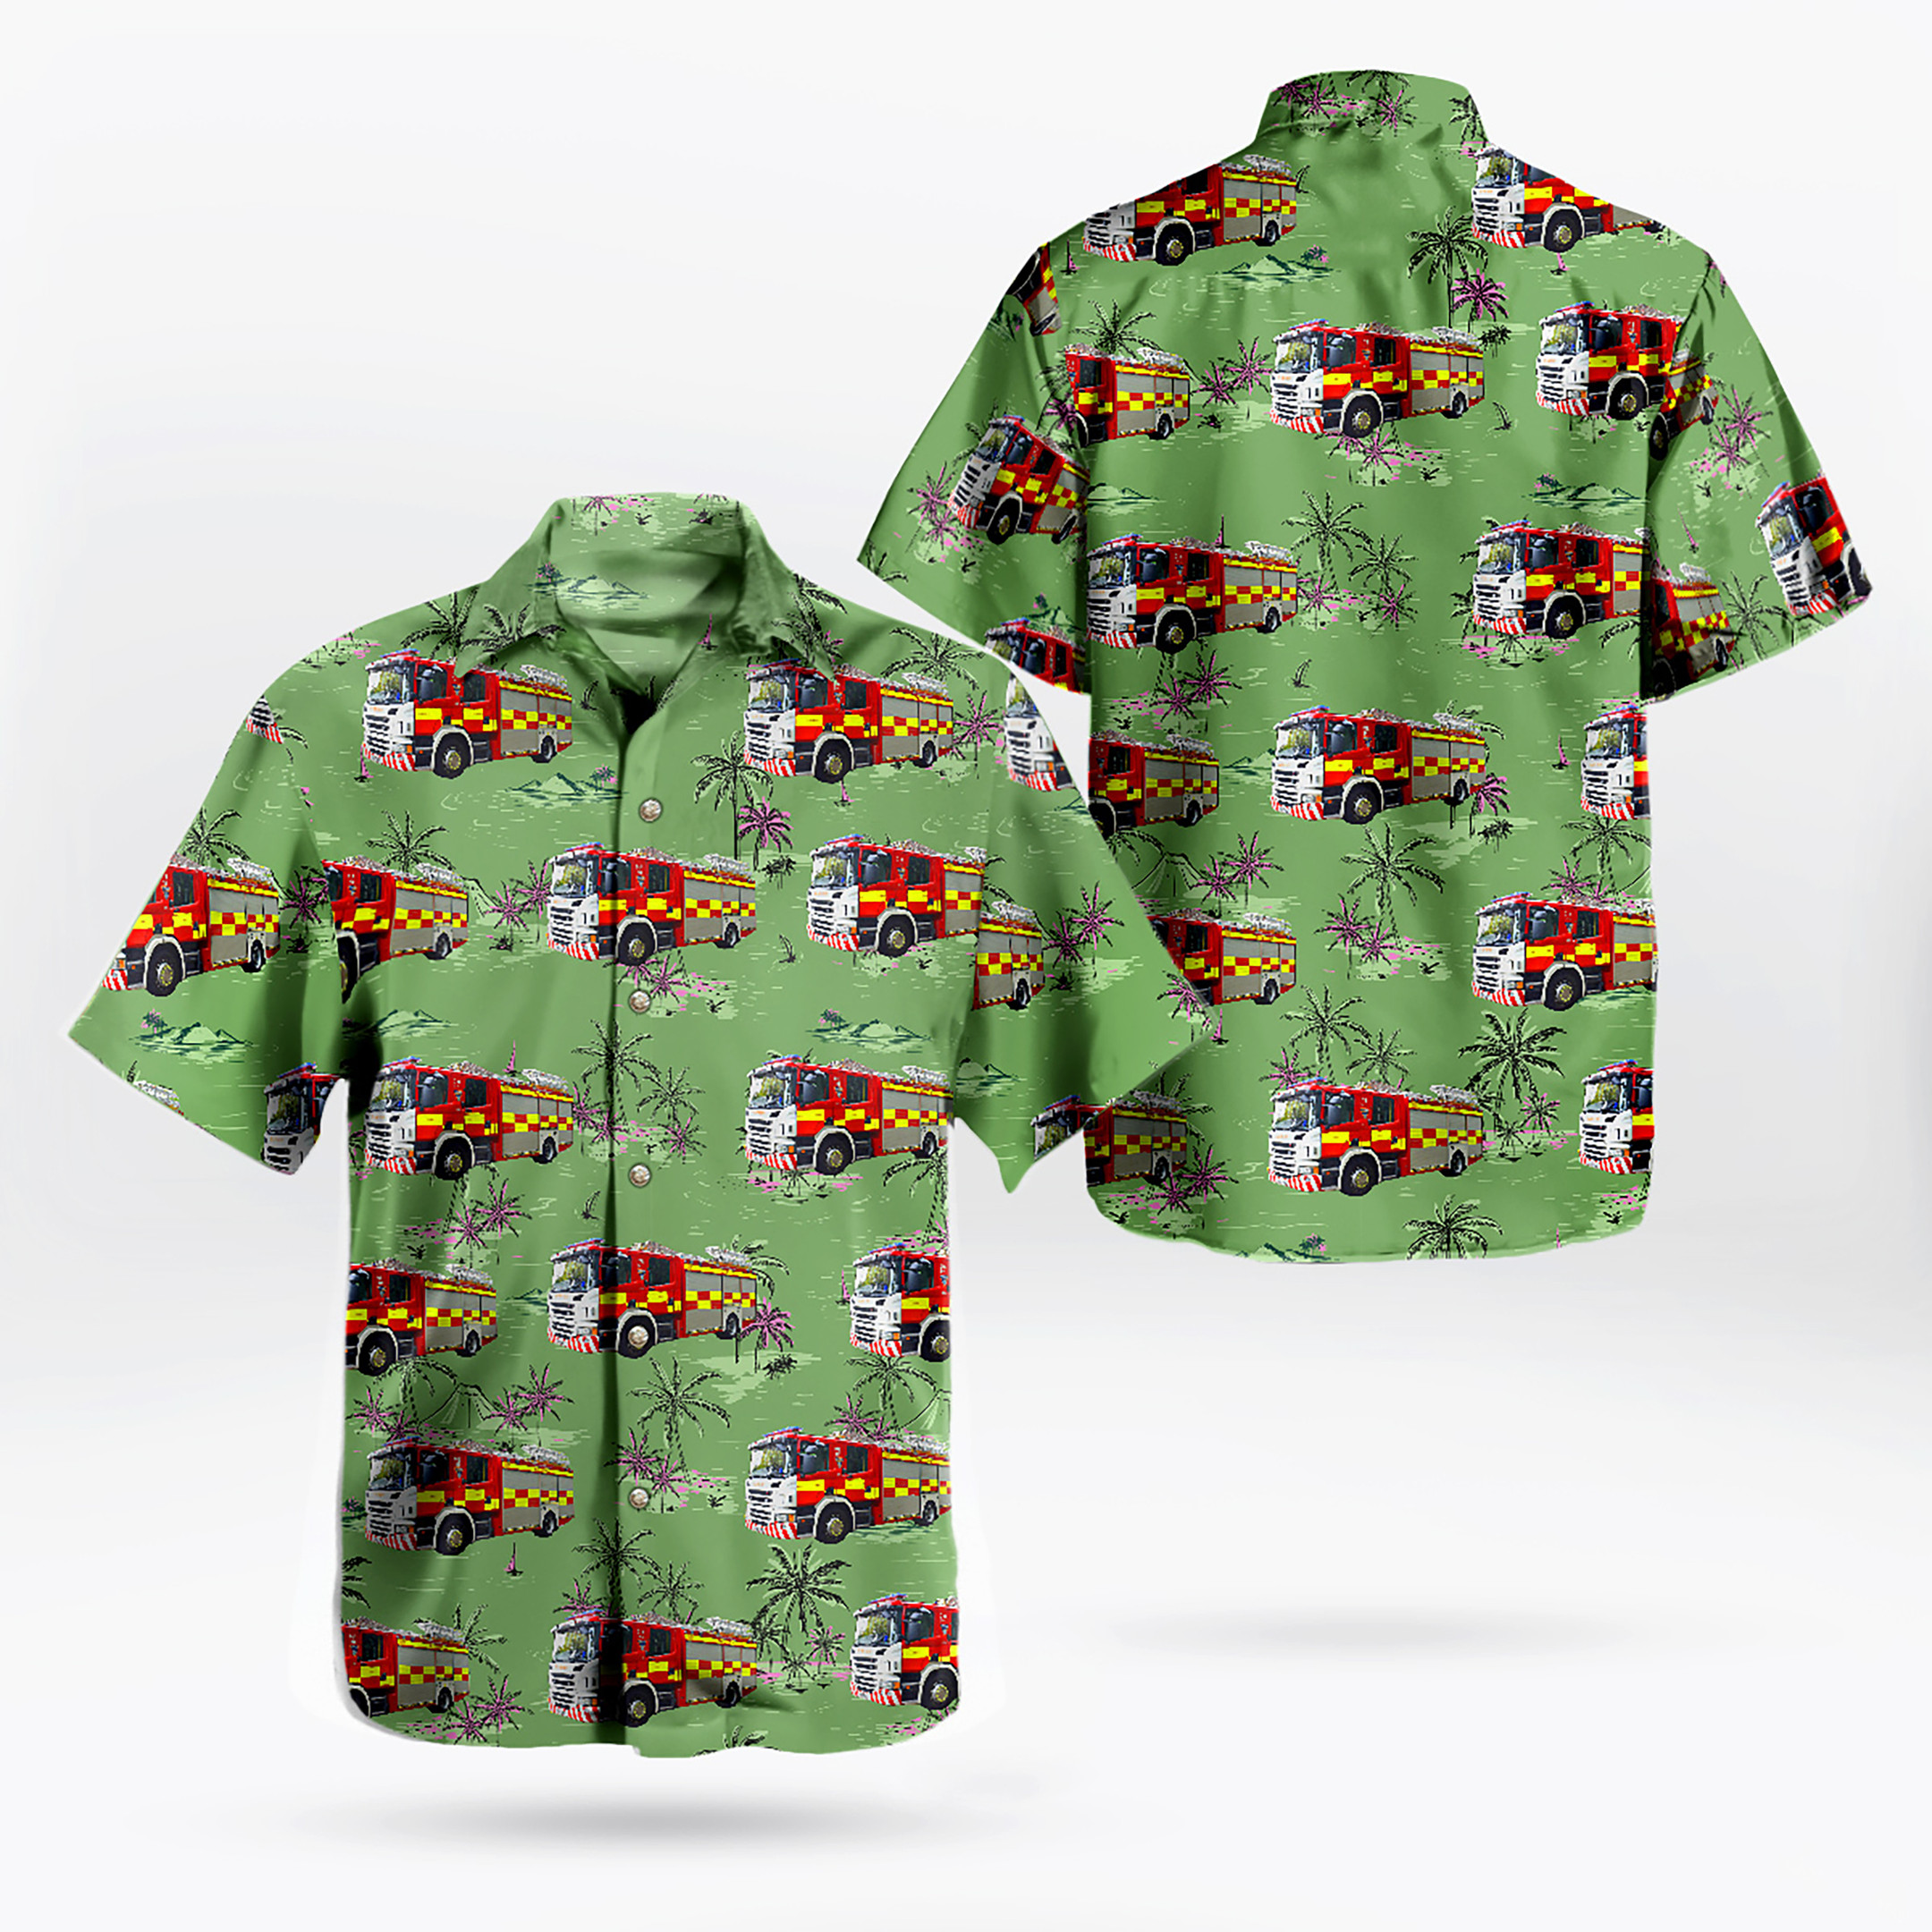 If you are in need of a new summertime look, pick up this Hawaiian shirt 289